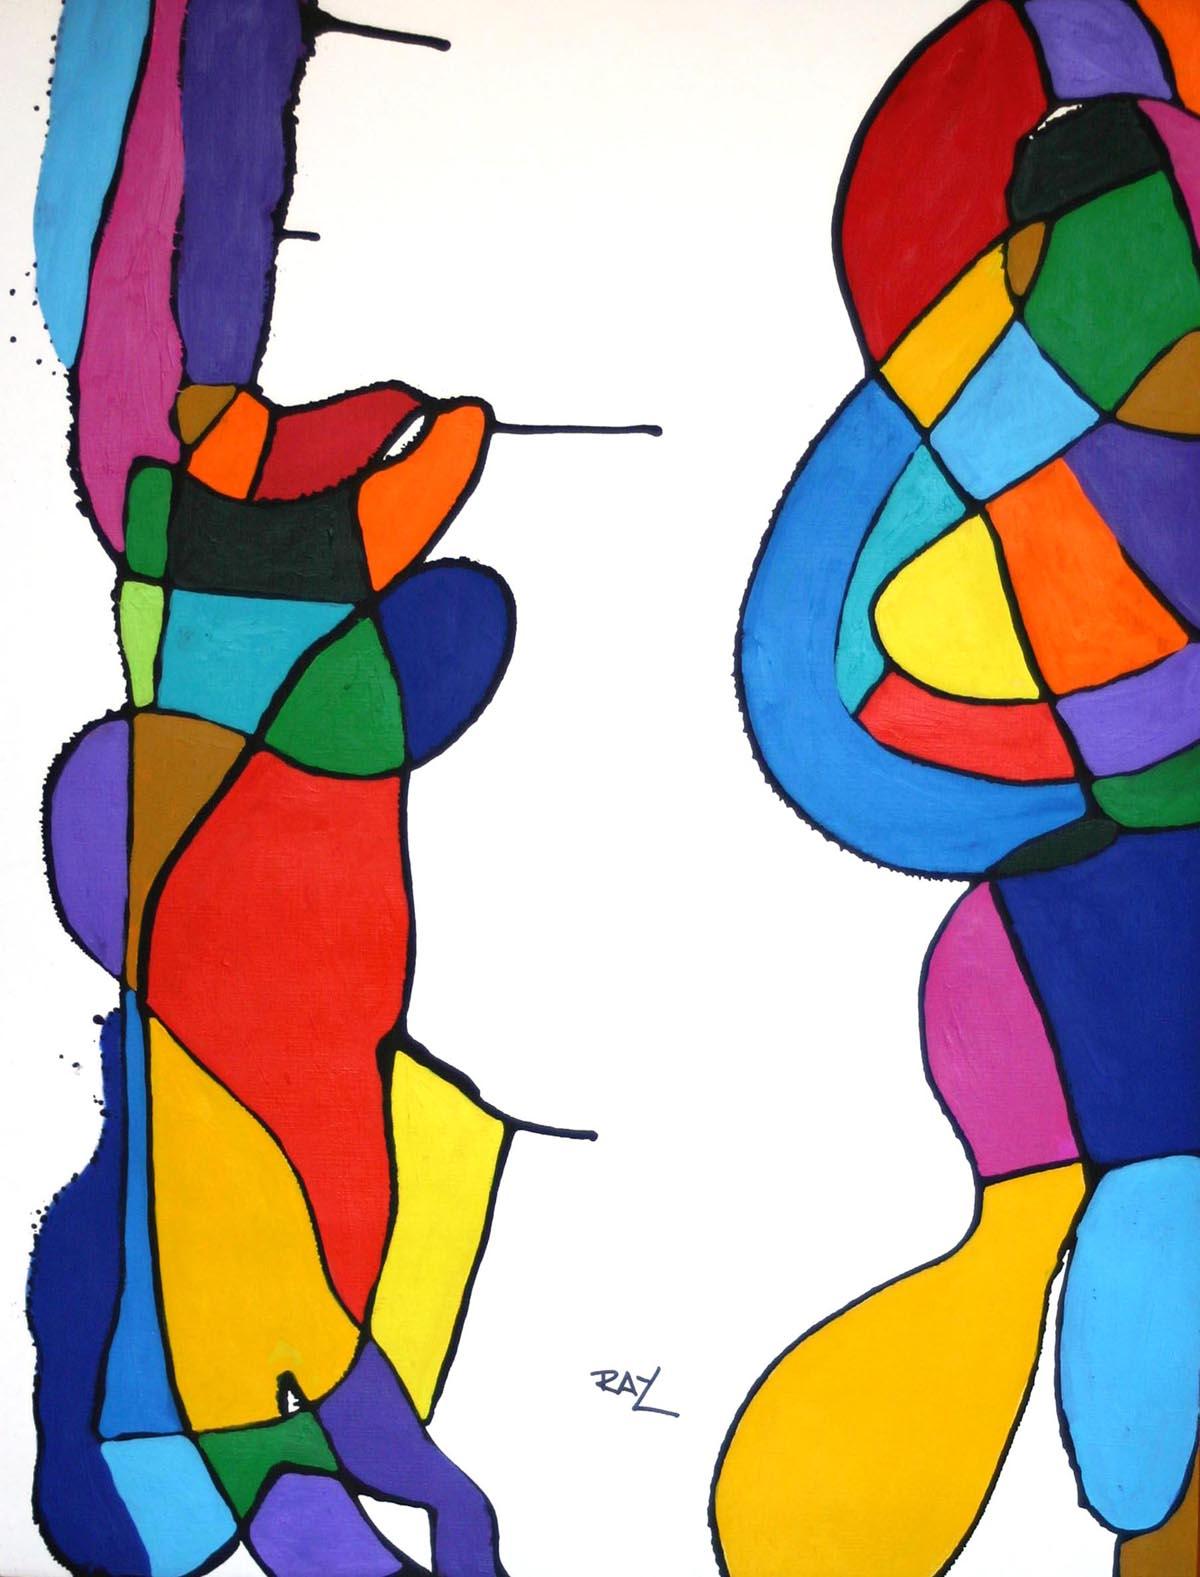 Invisible, Abstraction figurative, Acrylique sur papier, Abstraction moderniste, 1995 - Painting de Ray Leight